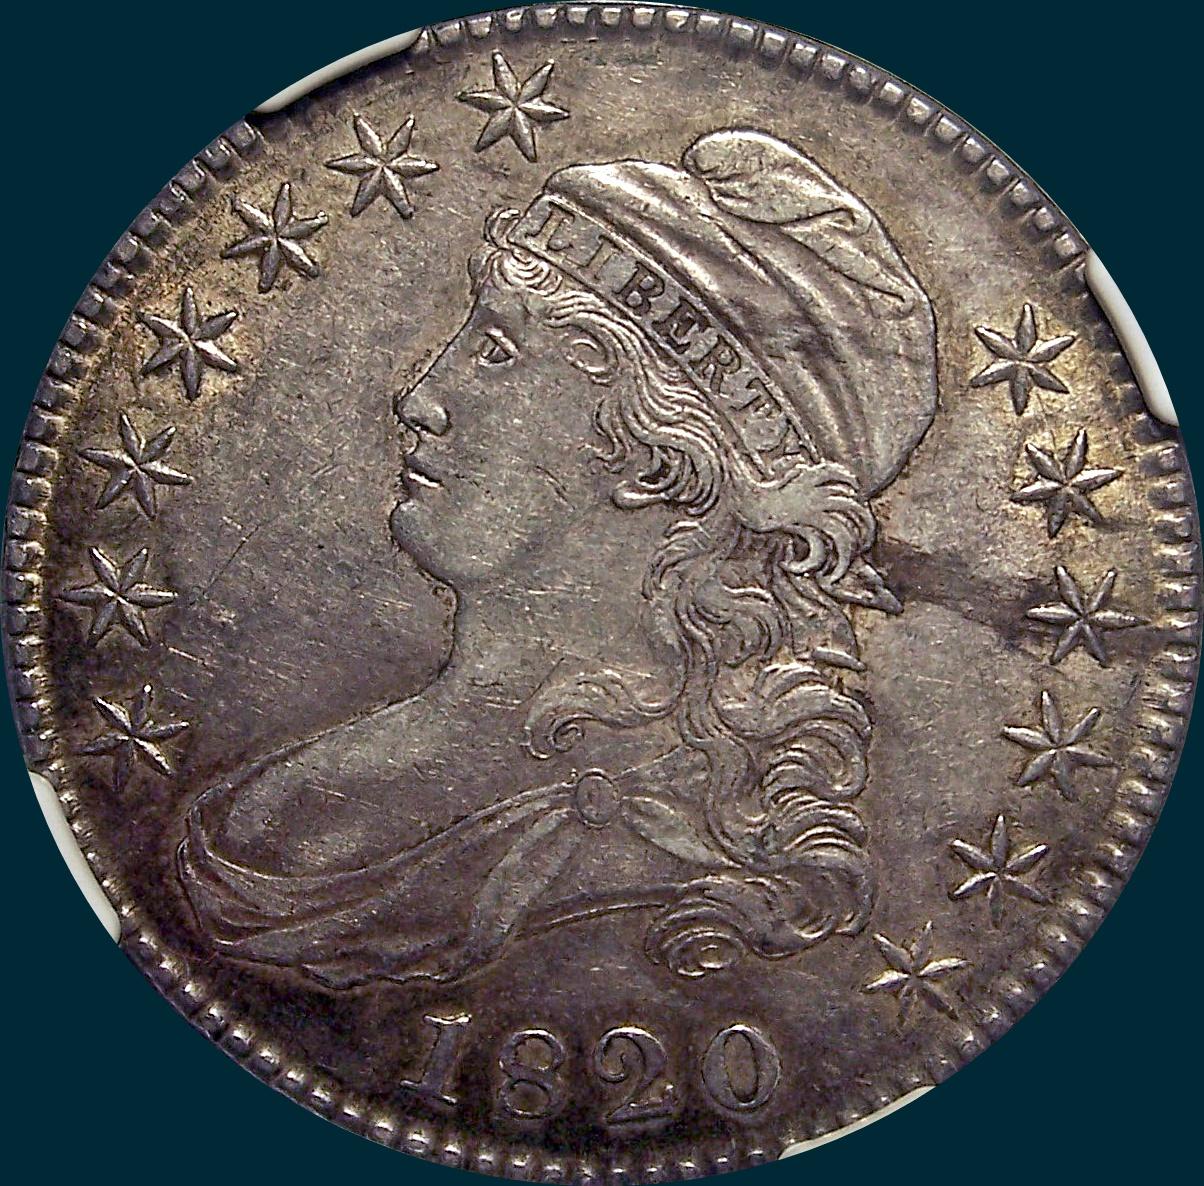 1820, O-108, Square Base 2, Large Date, No Knob, Capped Bust Half Dollar